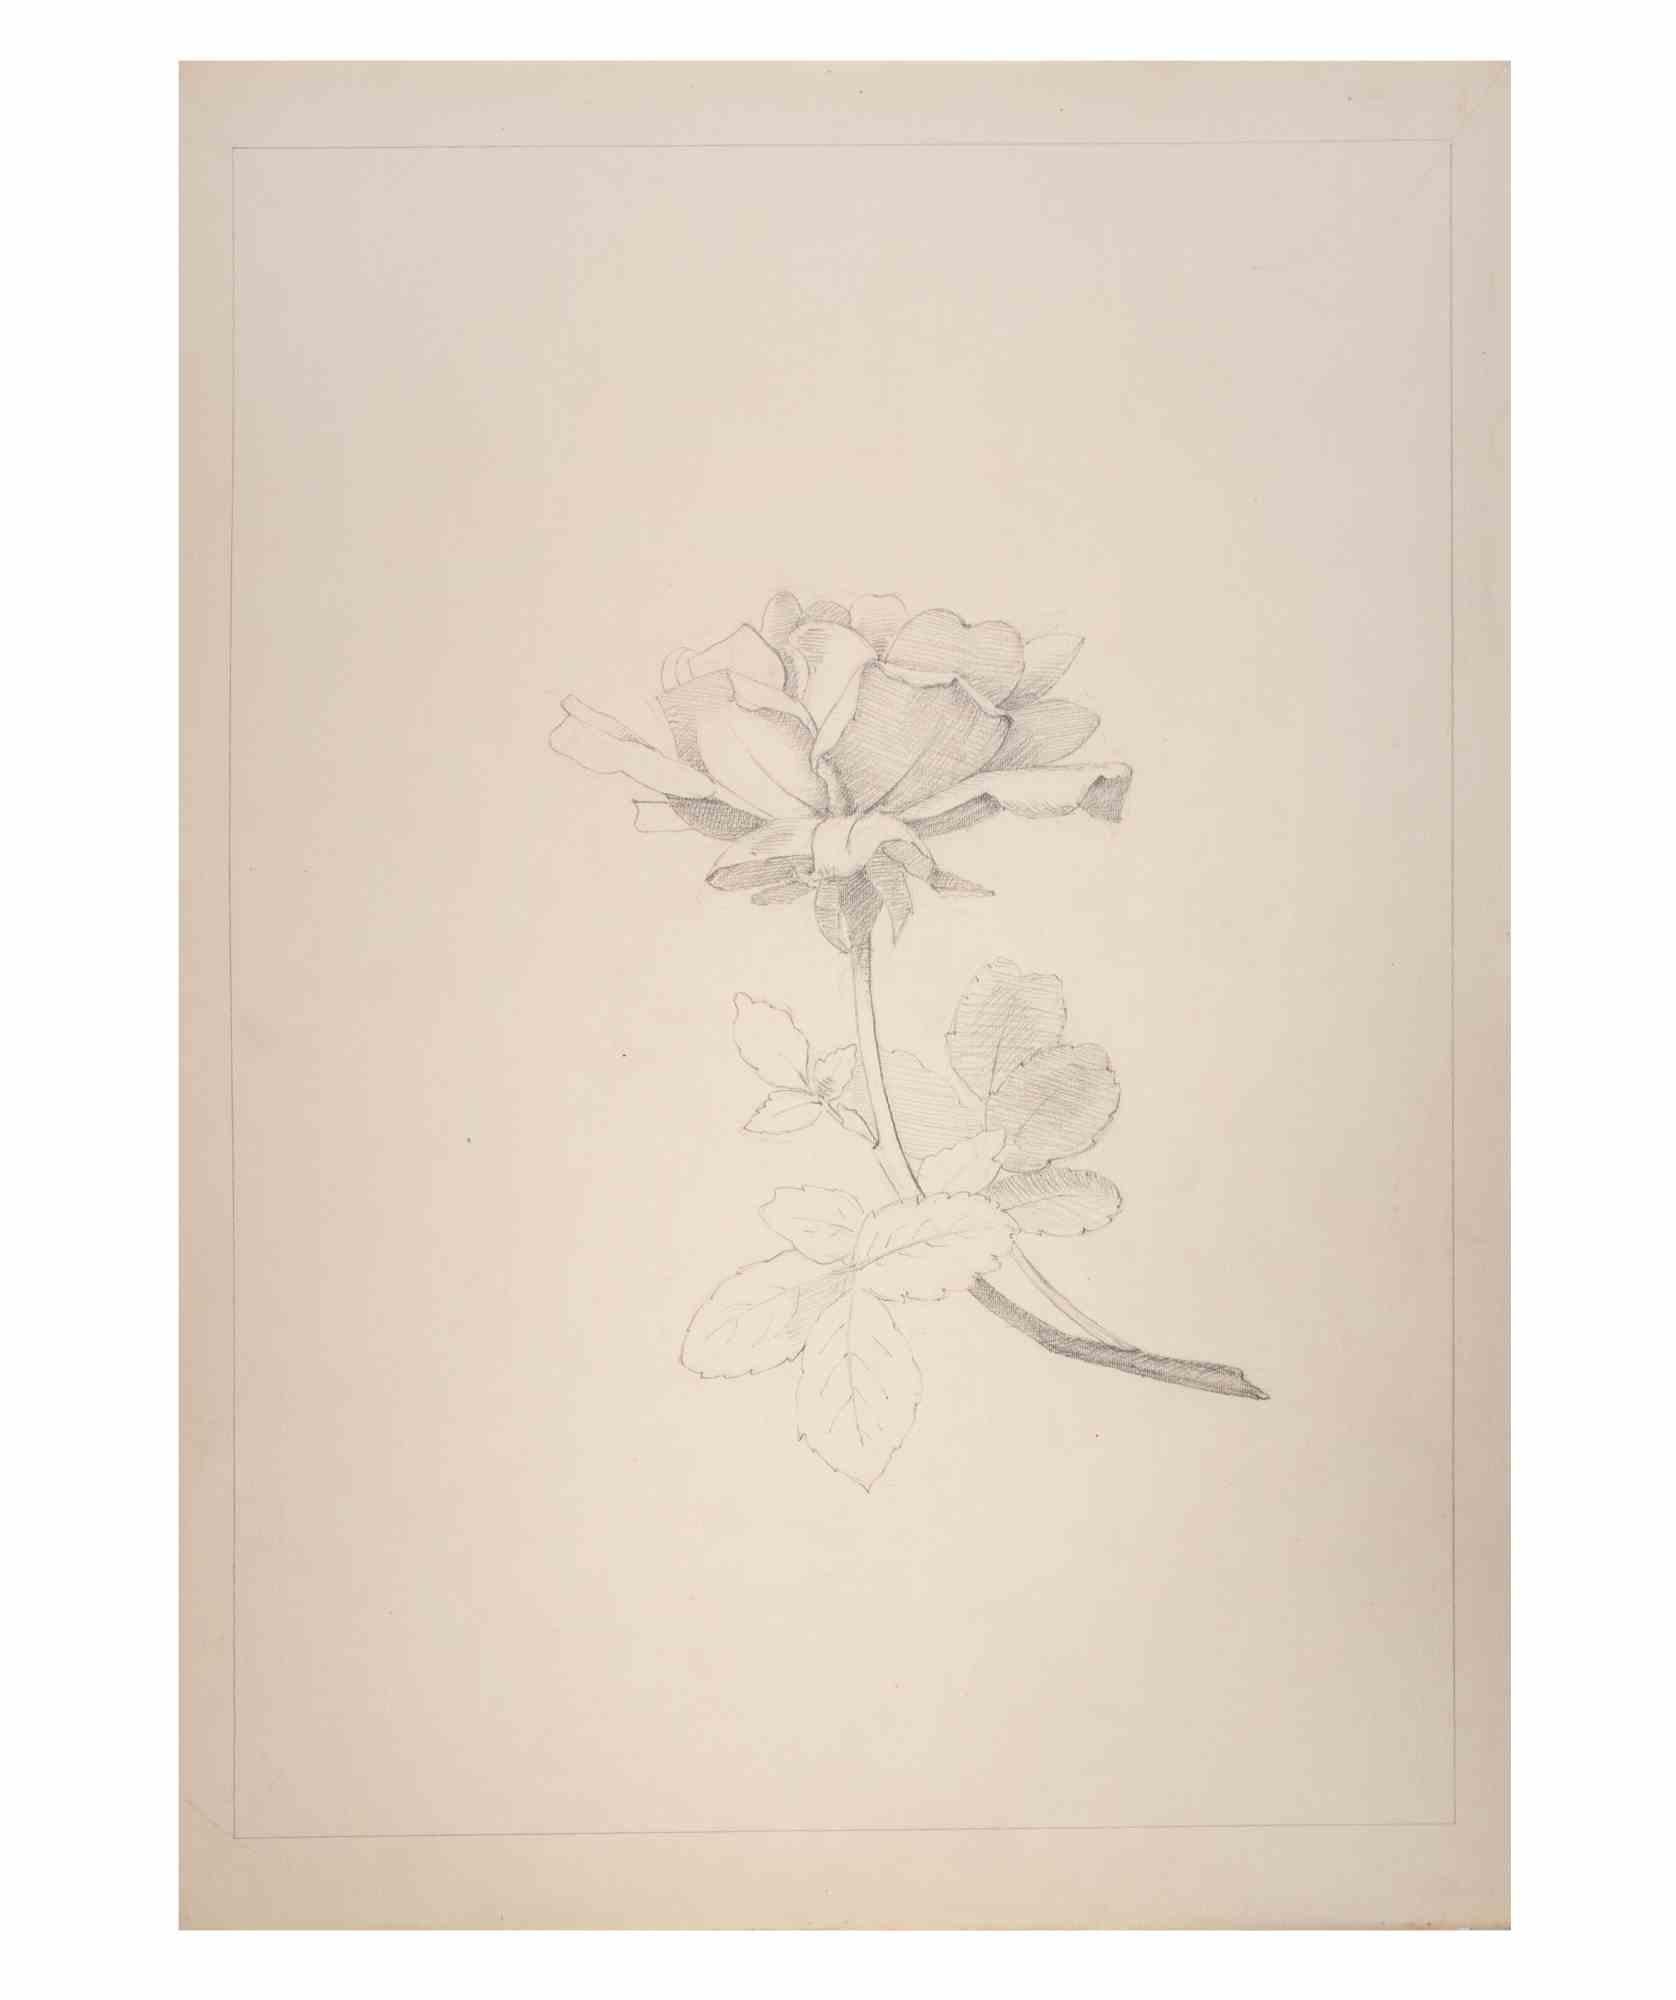 Rose is an Artwork realized by the Italian Artist Aurelio Mistruzzi in 1905.

Drawing on paper.

Good conditions.

Aurelio Mistruzzi (1880-1960) studied at the Udine Art School, having classes with the Sculptor De Paoli. He moved to Venice to study